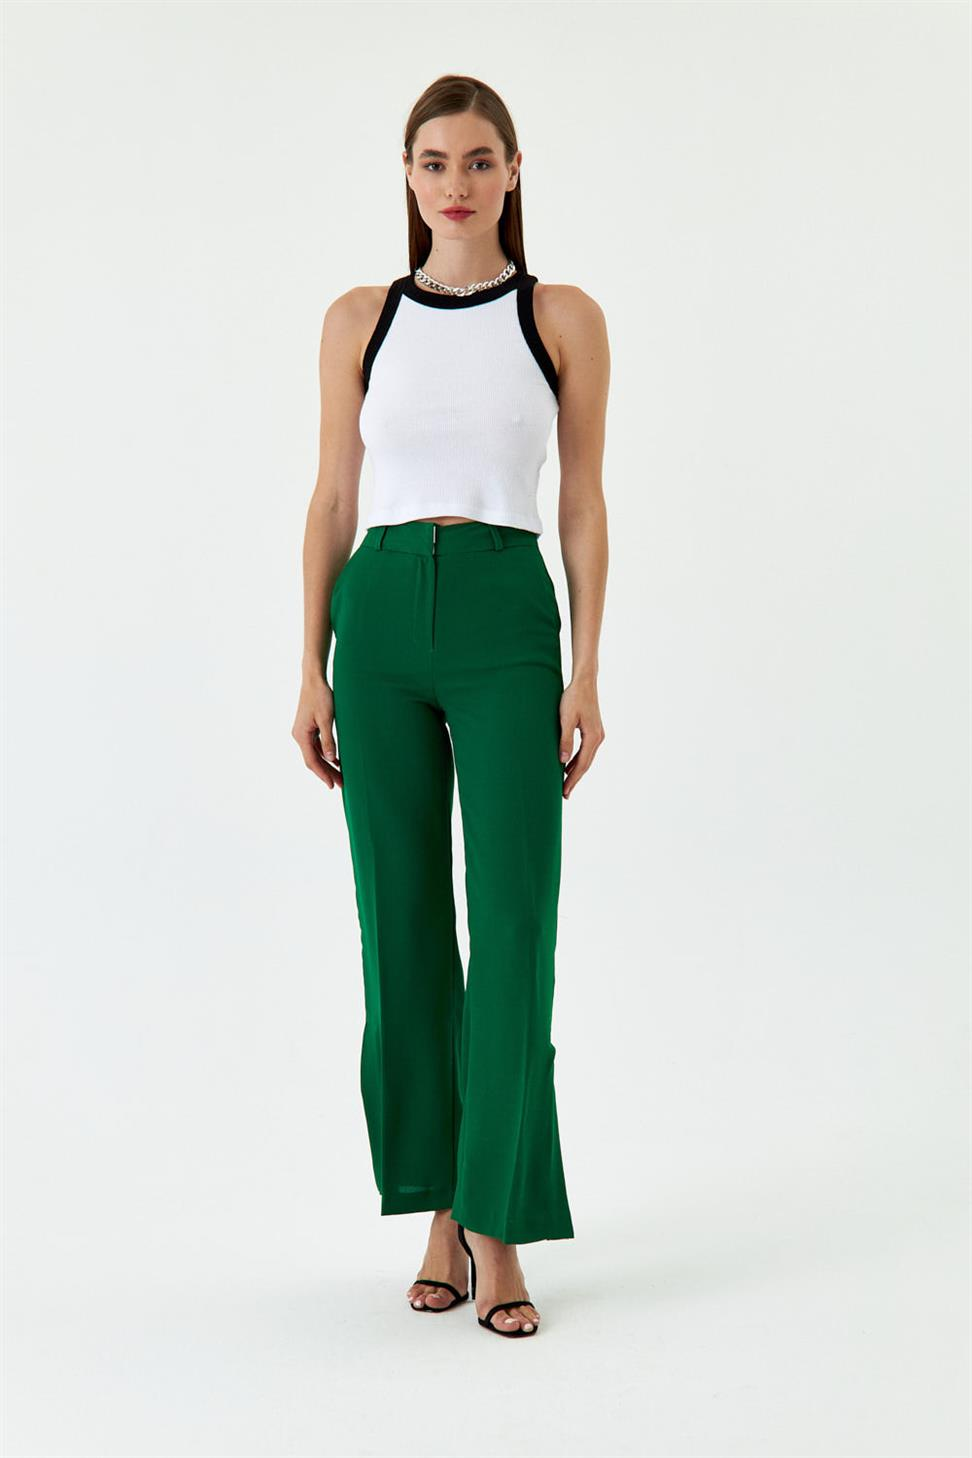 Green WOMEN'S TROUSERS WITH SPIRAL DETAIL - Lebbse